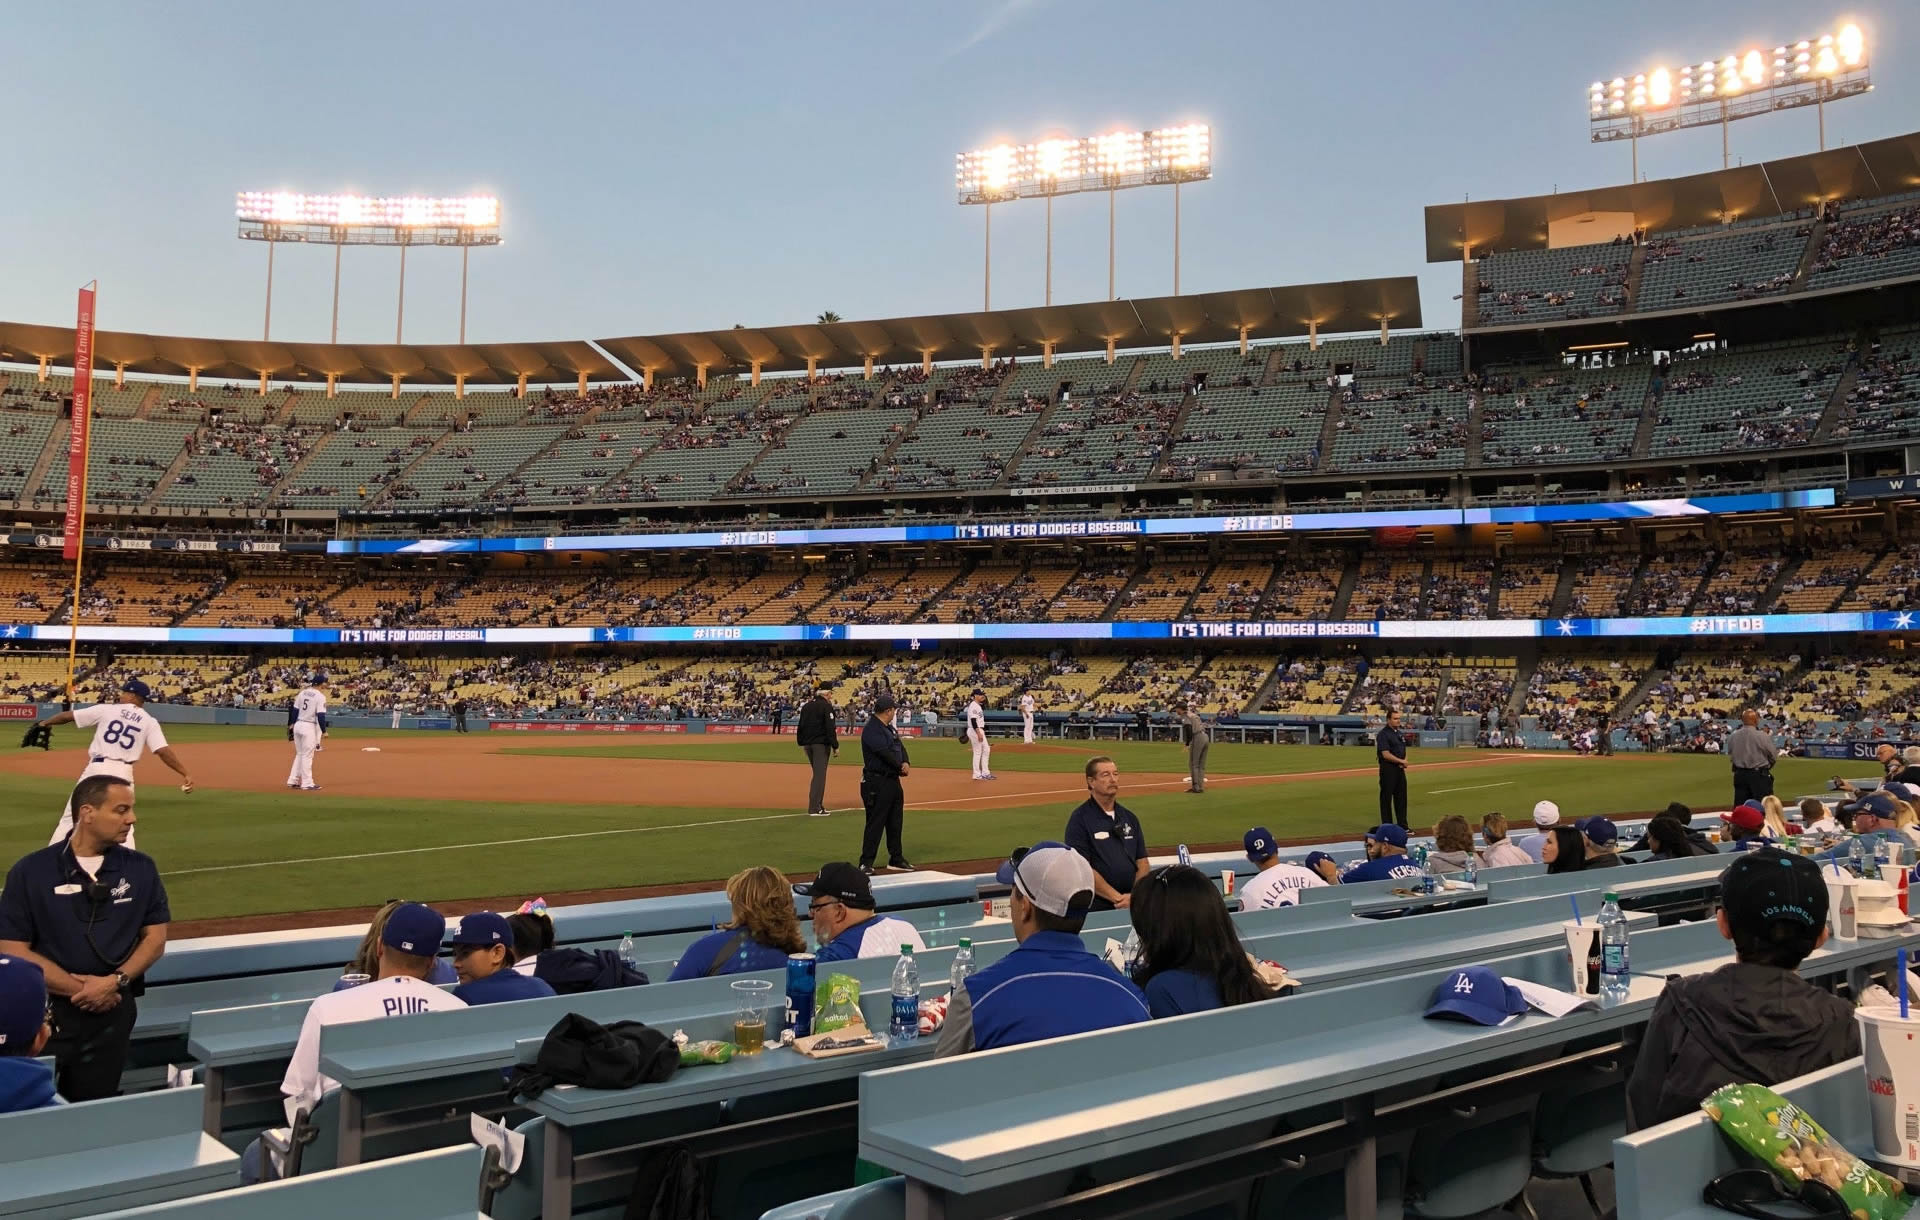 section 37, row 6 seat view  - dodger stadium